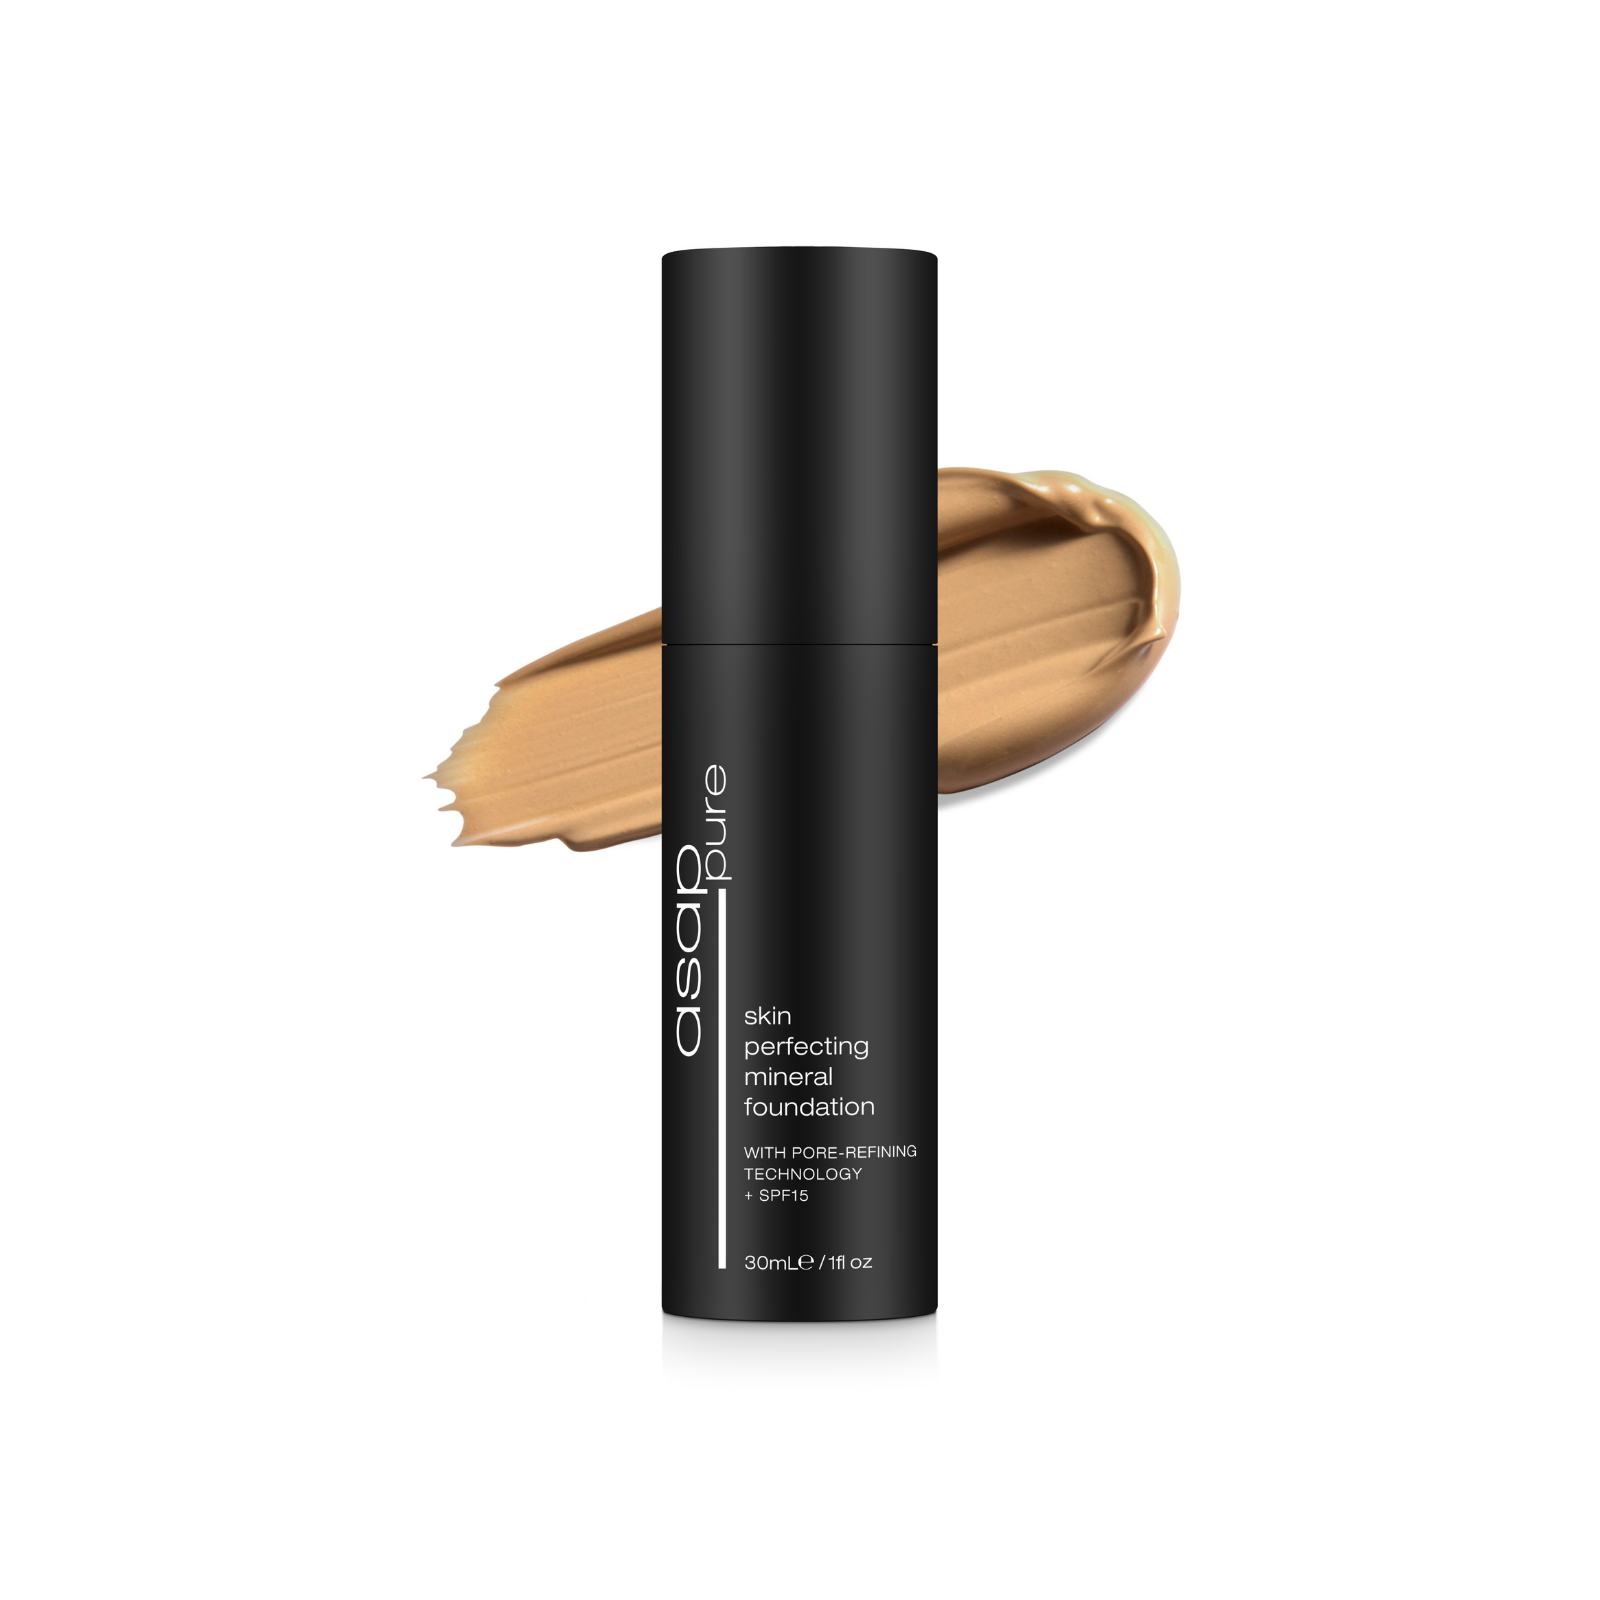 ASAP Skin Perfecting Mineral Foundation with Pore-Refining Technology + SPF15 - Cool Two 30ml